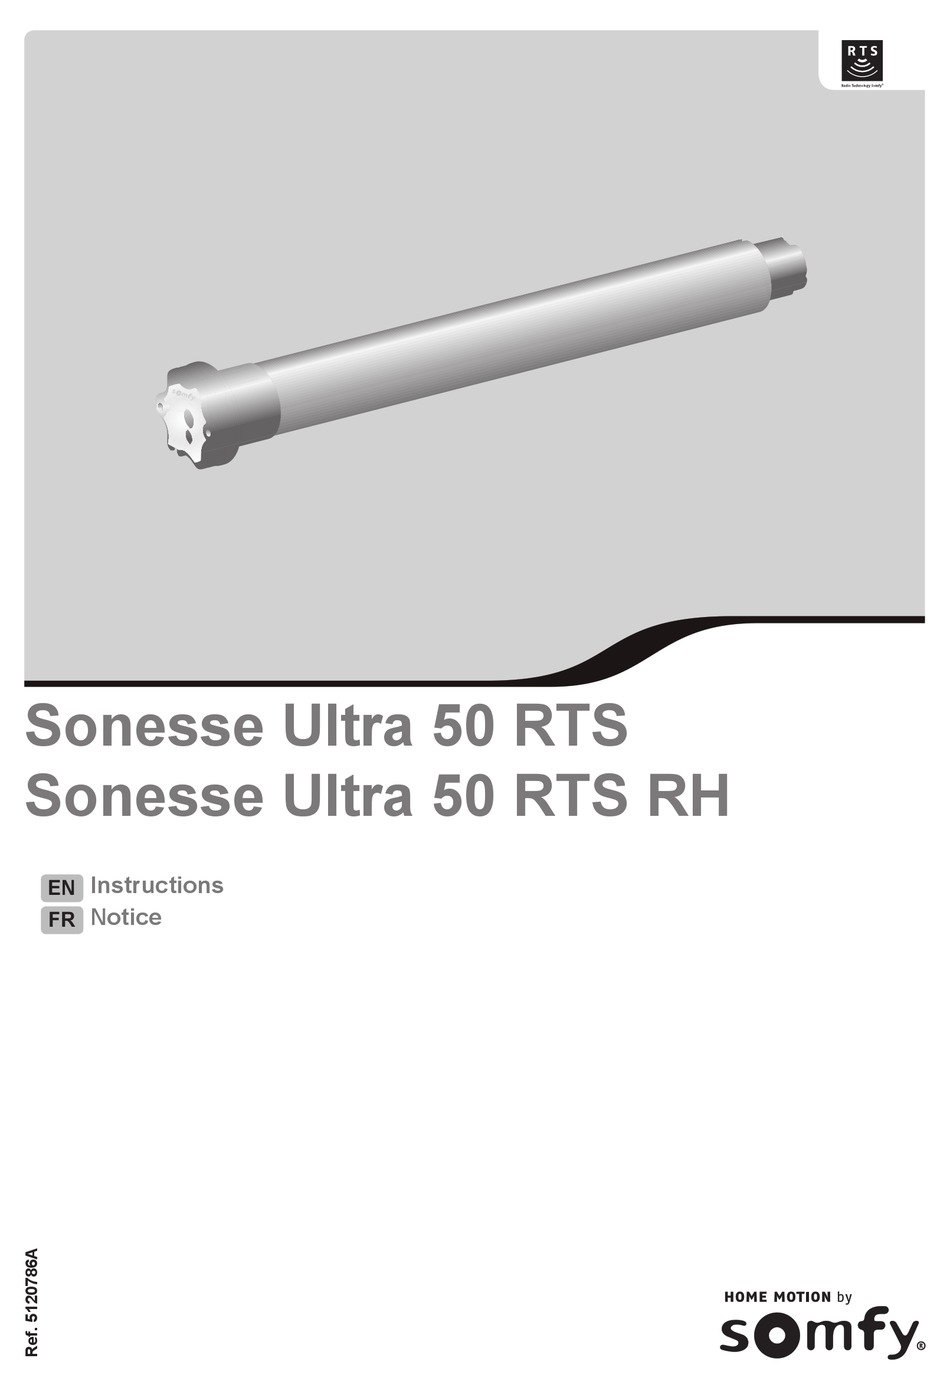 SOMFY SONESSE ULTRA 50 RTS INSTRUCTIONS MANUAL Pdf Download